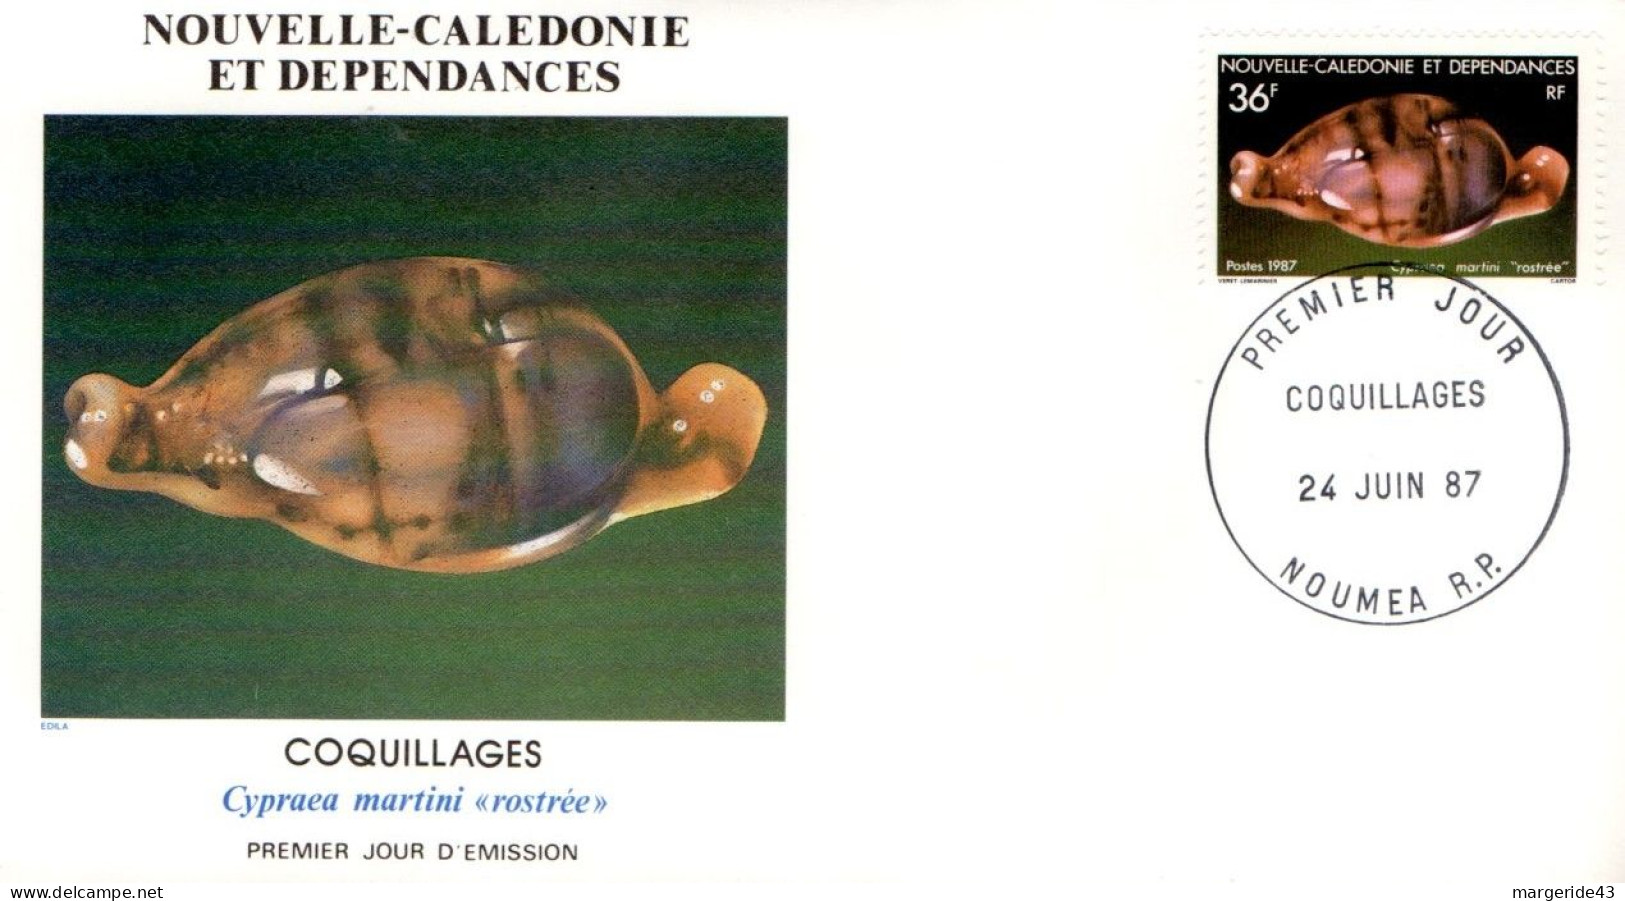 NOUVELLE CALEDONIE FDC 1987 COQUILLAGES - FDC